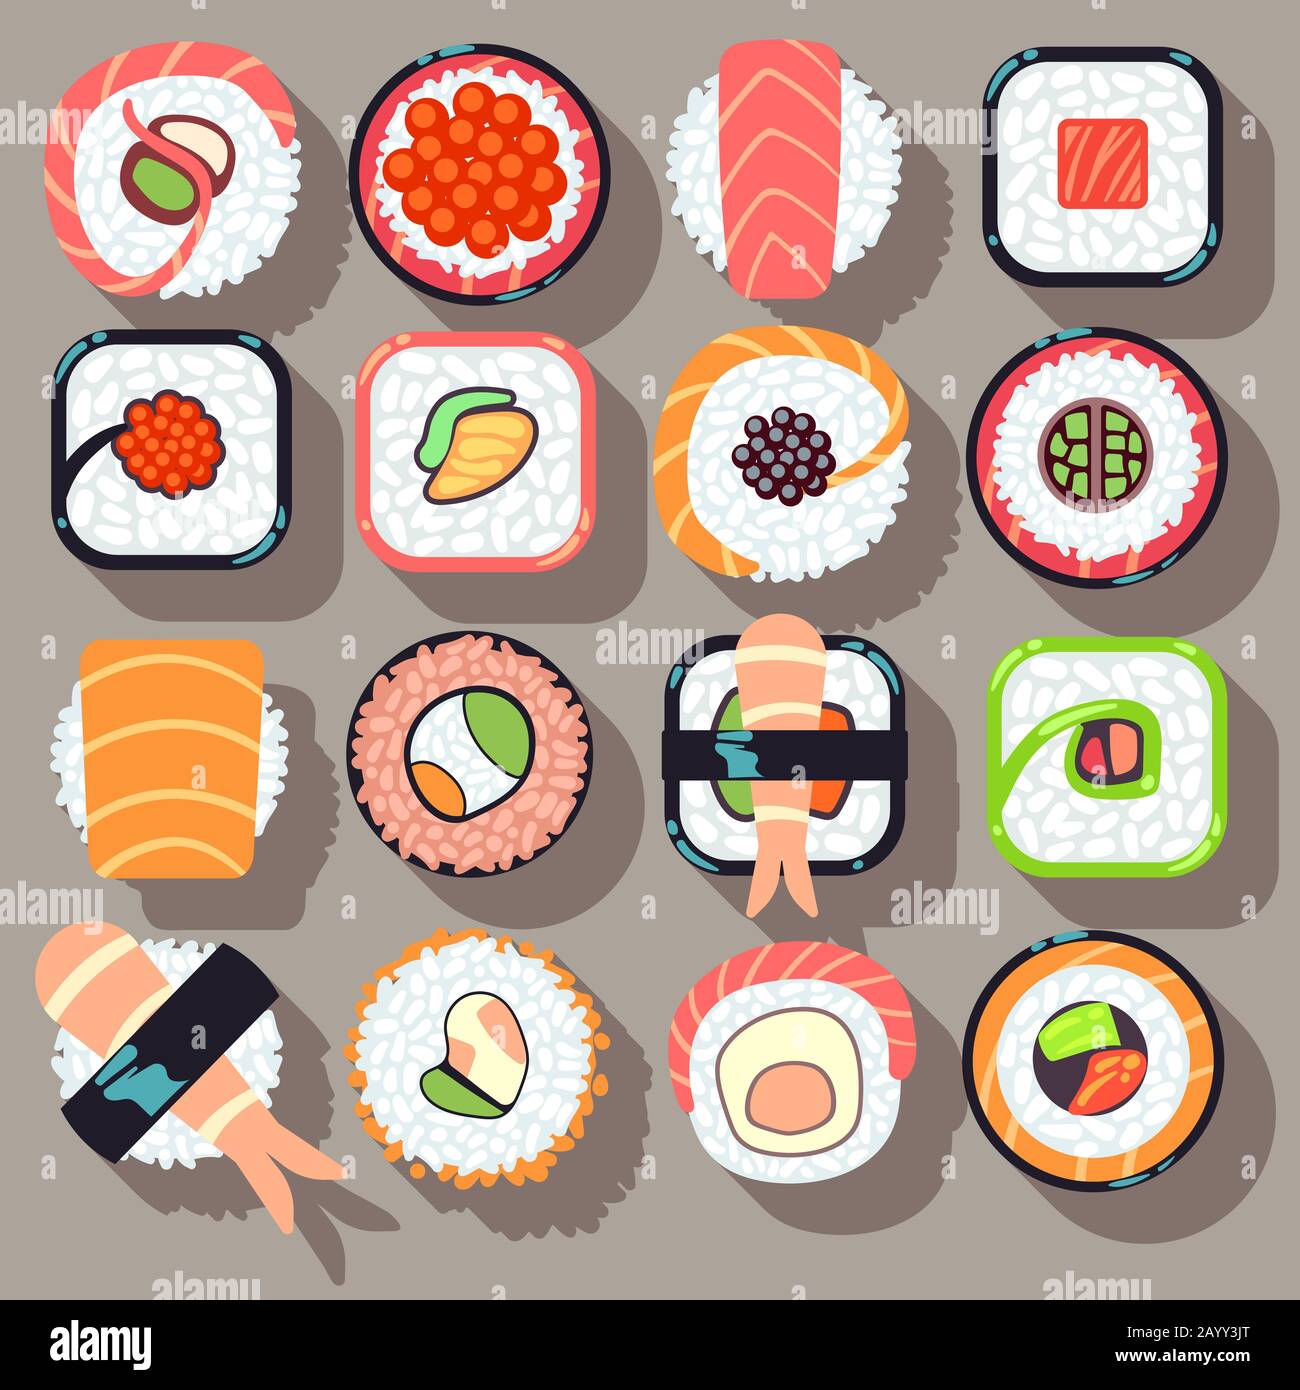 Sushi Japanese Cuisine Food Flat Vector Icons Sushi Food And Roll Sushi Icon Seafood Illustration Stock Vector Image Art Alamy